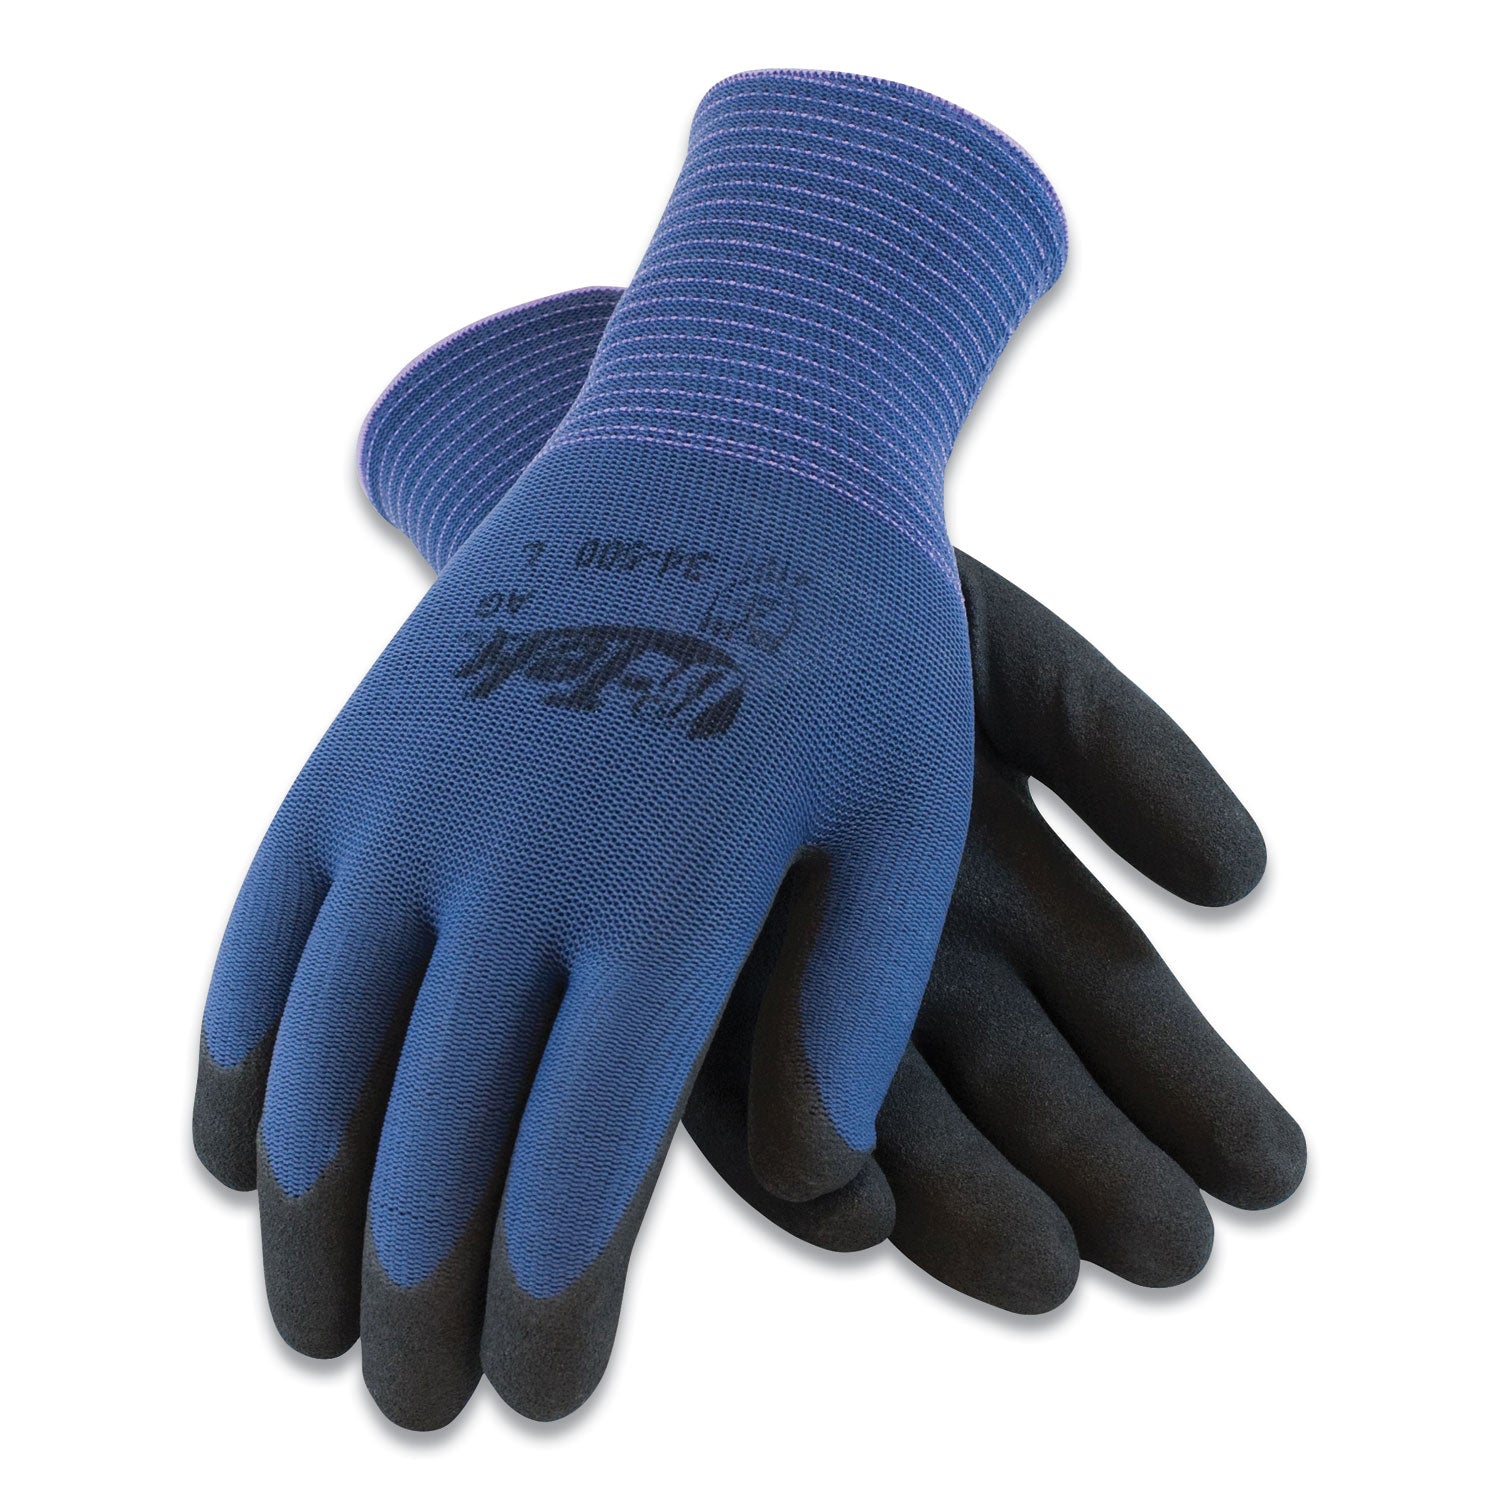 gp-nitrile-coated-nylon-gloves-small-blue-black-12-pairs_pid34500s - 1